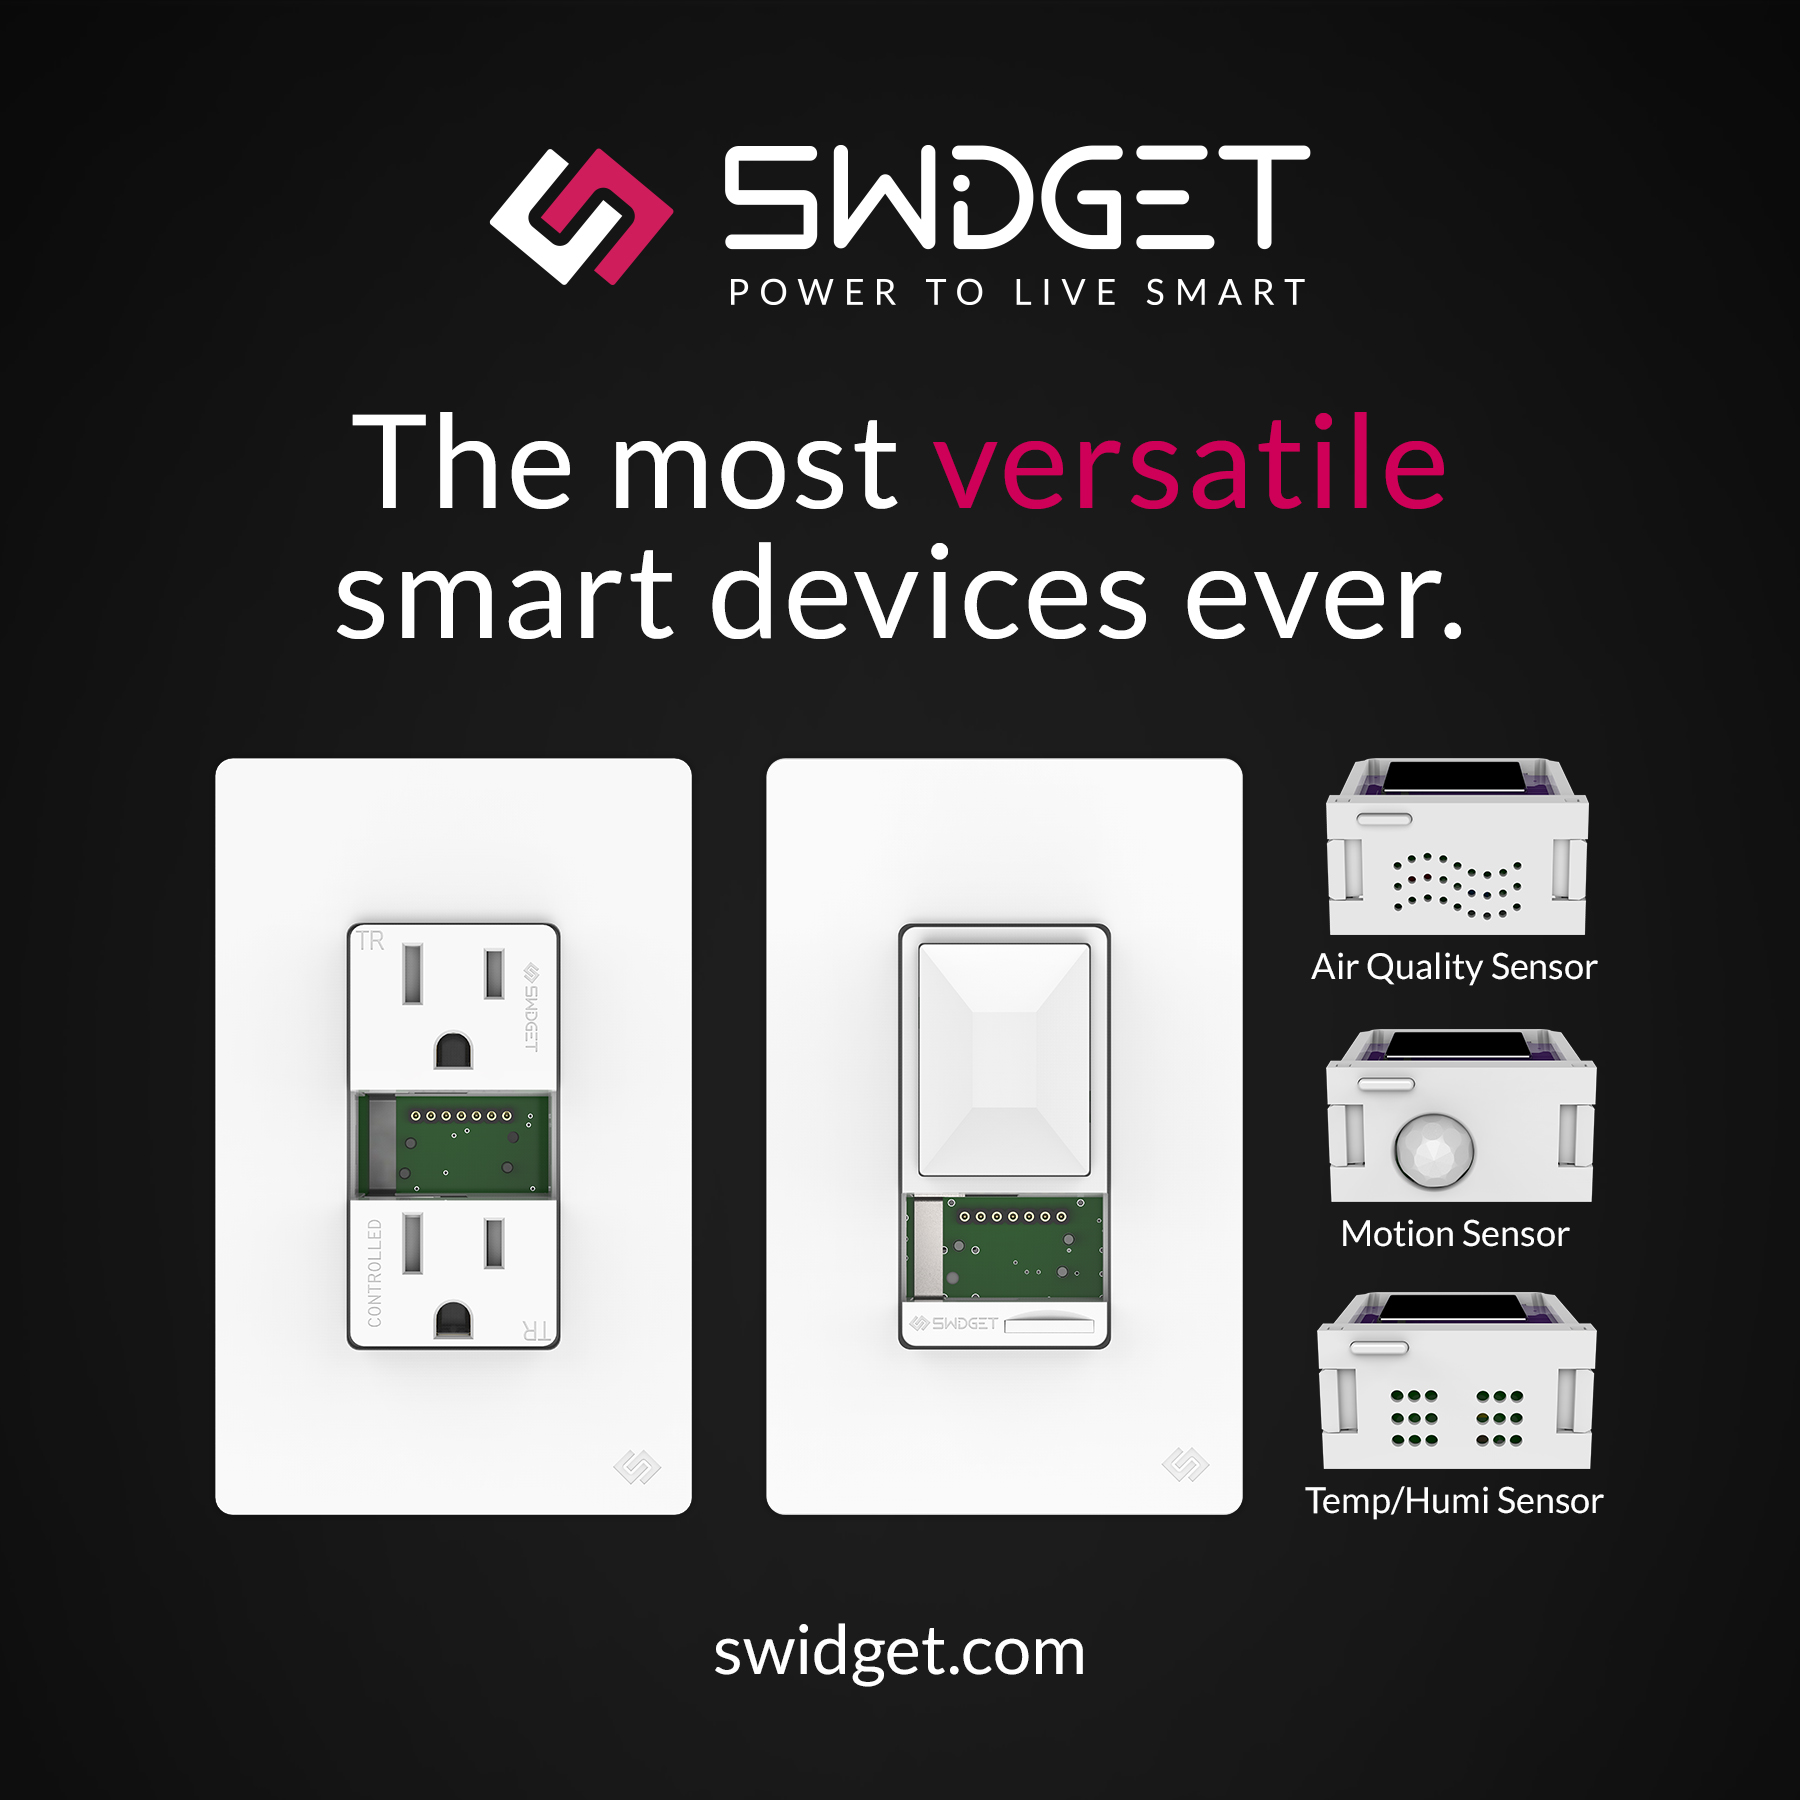 Swidget's outlets and switches are installed “smart ready.” They function as regular wiring devices until they are paired with a Swidget smart Inserts.